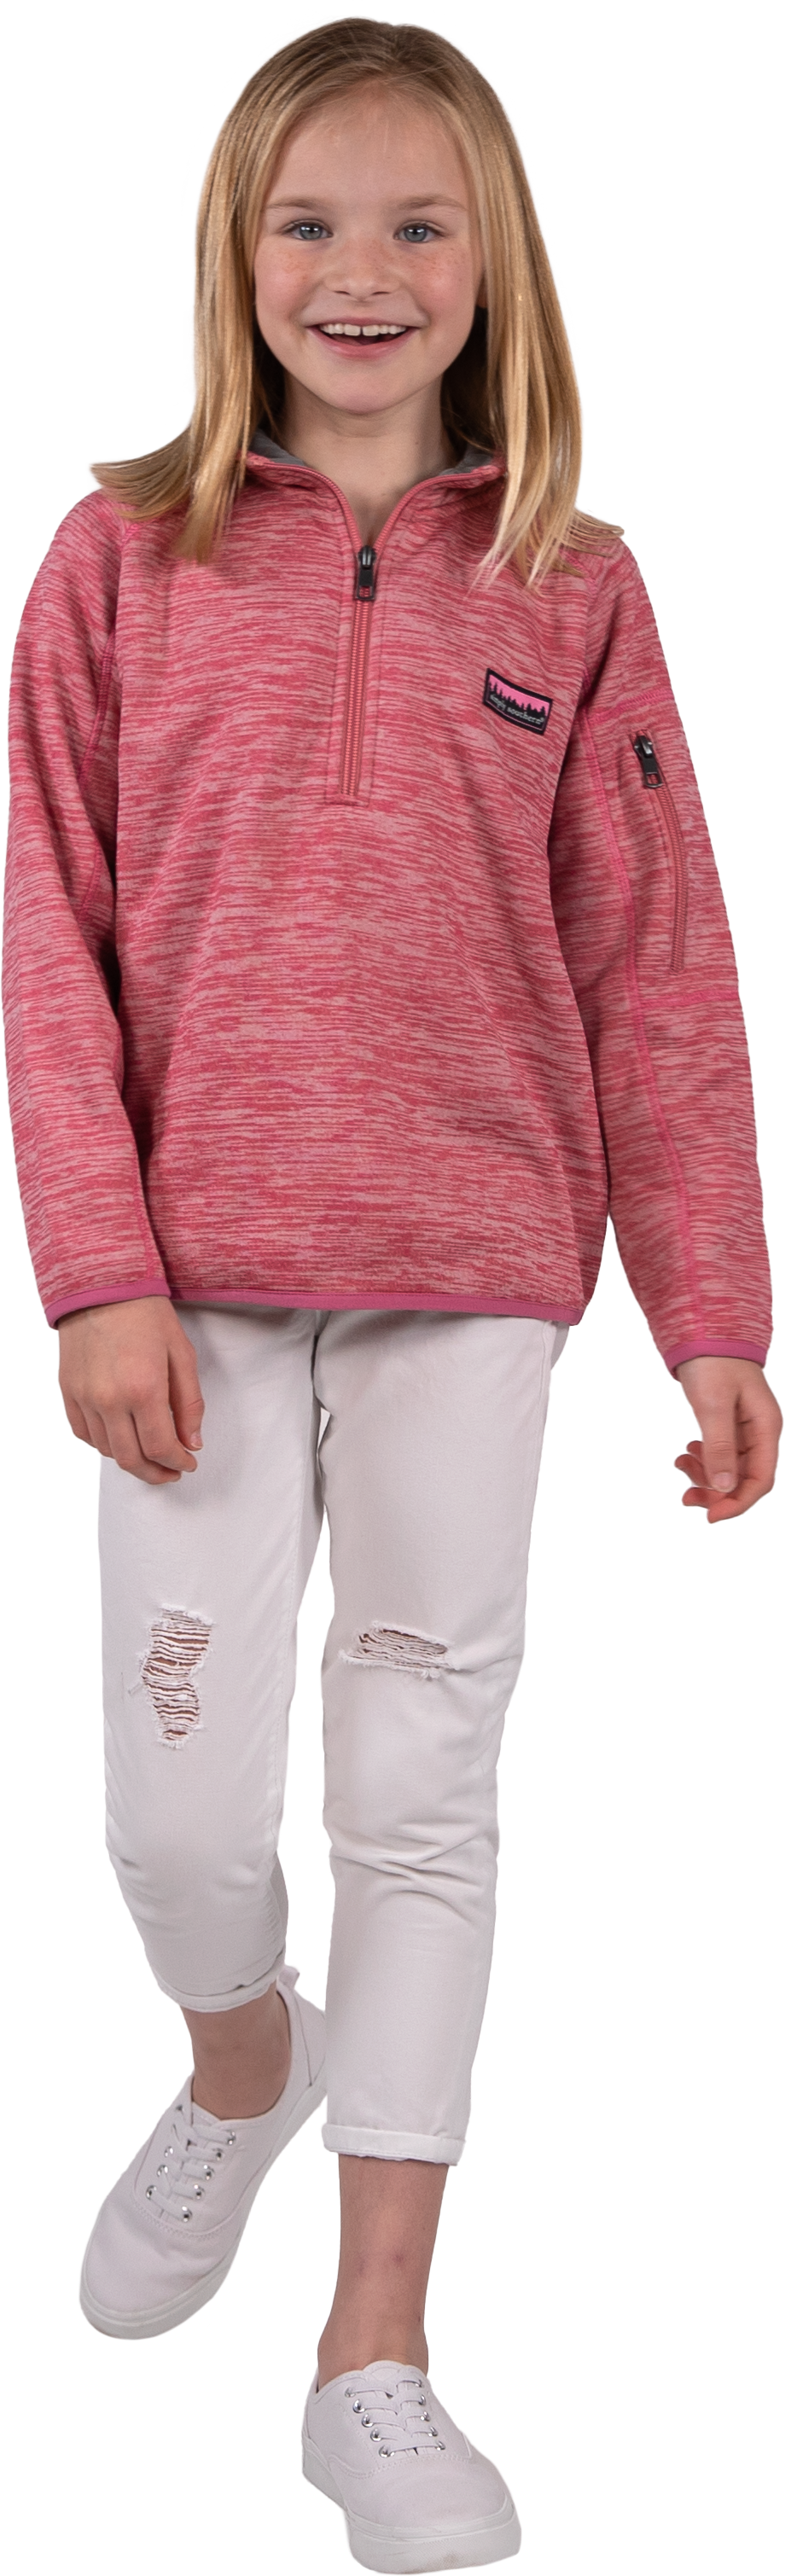 Simply Sweater - Heather Pink